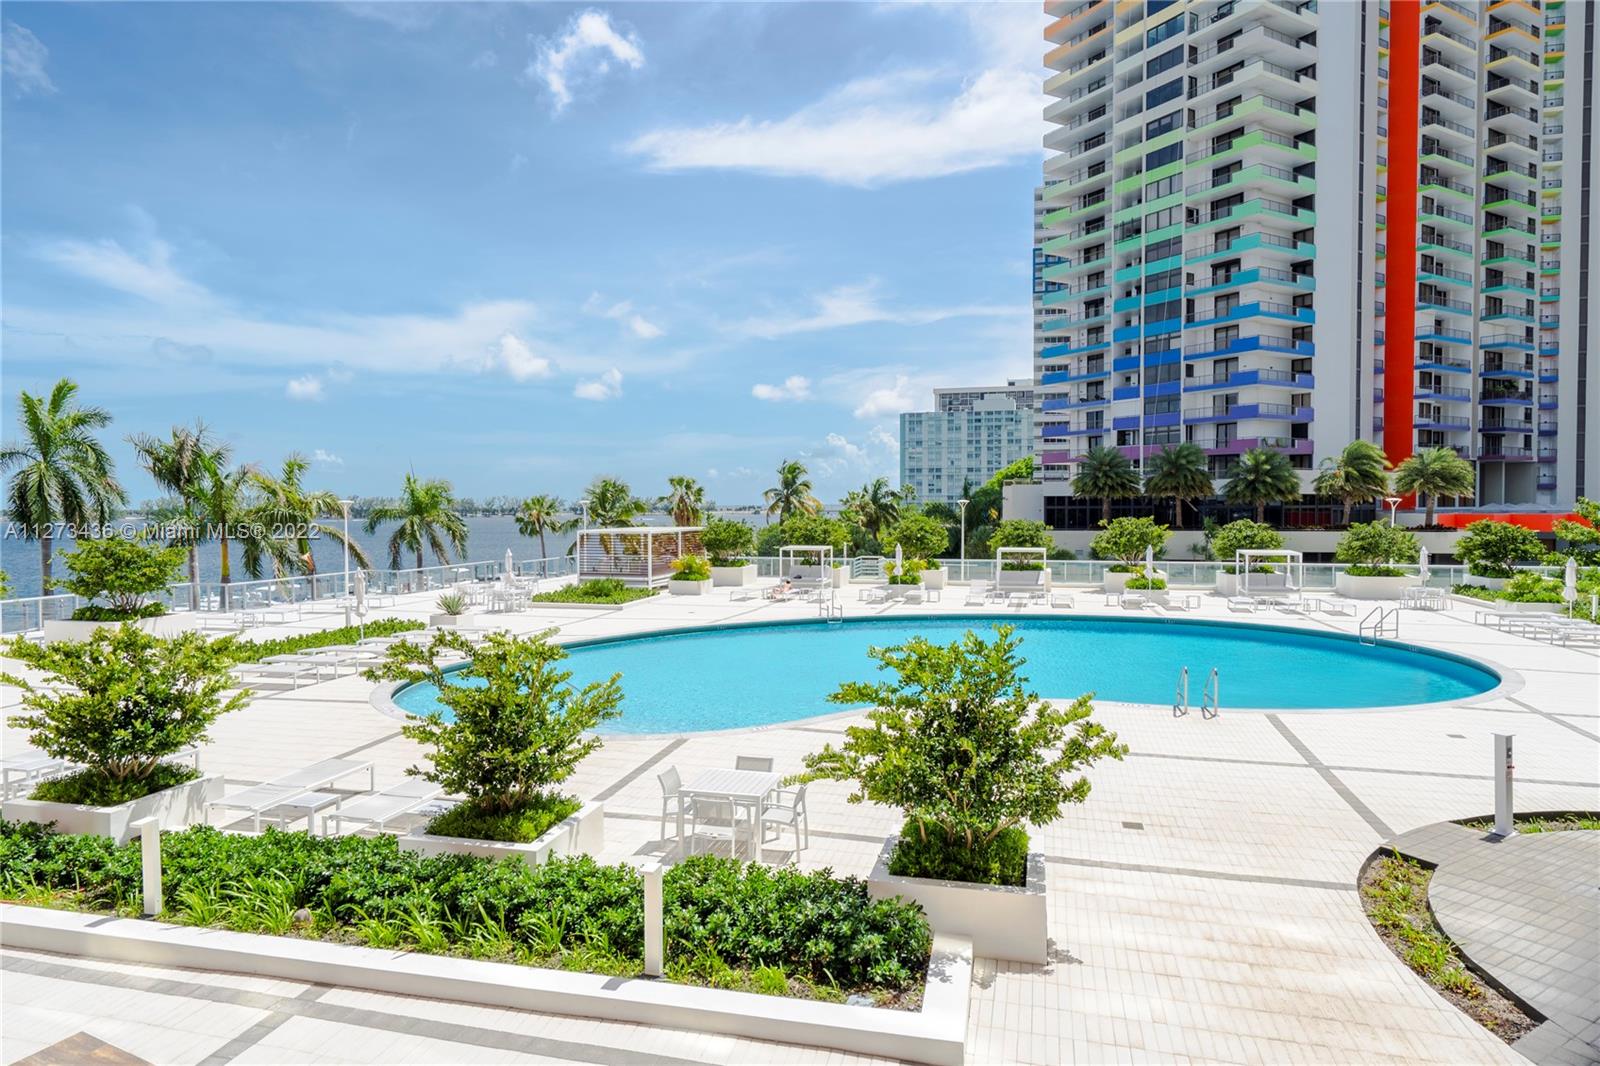 Breath taking water view from A tower corner unit, two bedrooms, two full baths and two balconies, remodel unit, new gym, new pool area, kids' playroom, great parking space, near restaurants and coffee shops, walk or bike anywhere. Must see apartment.